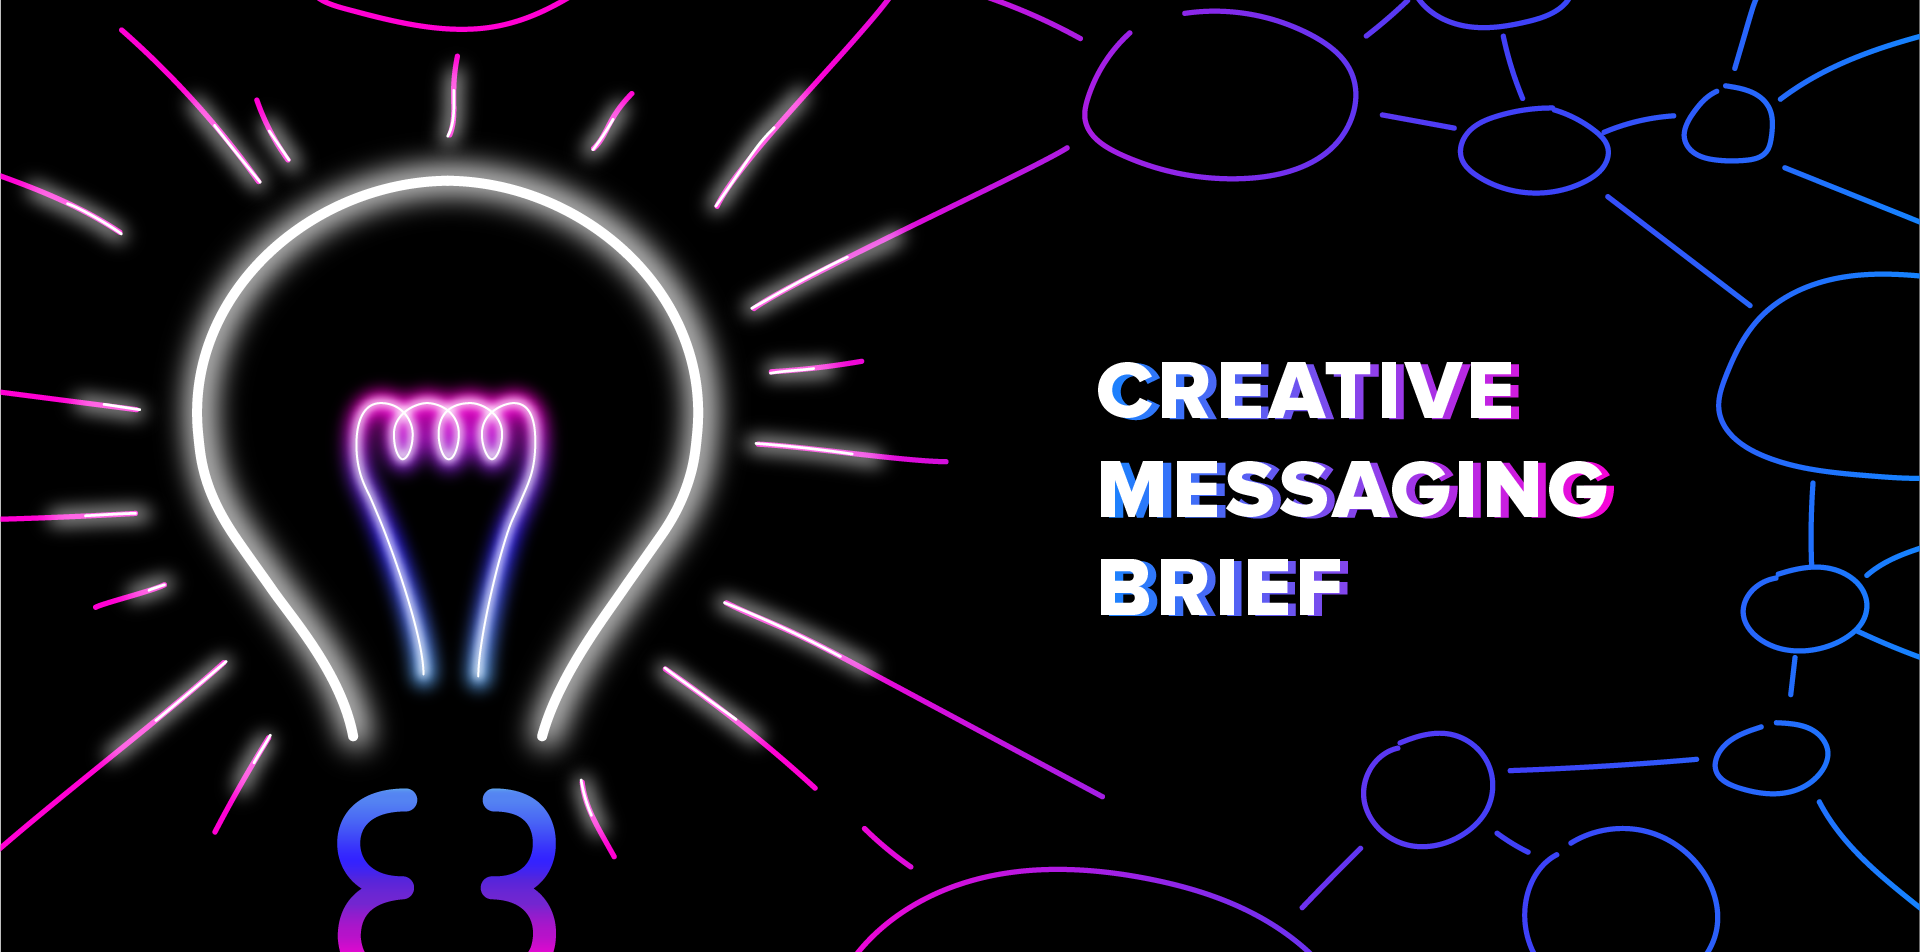 Designed image of a lightbulb in neon colors with text Creative Messaging Brief